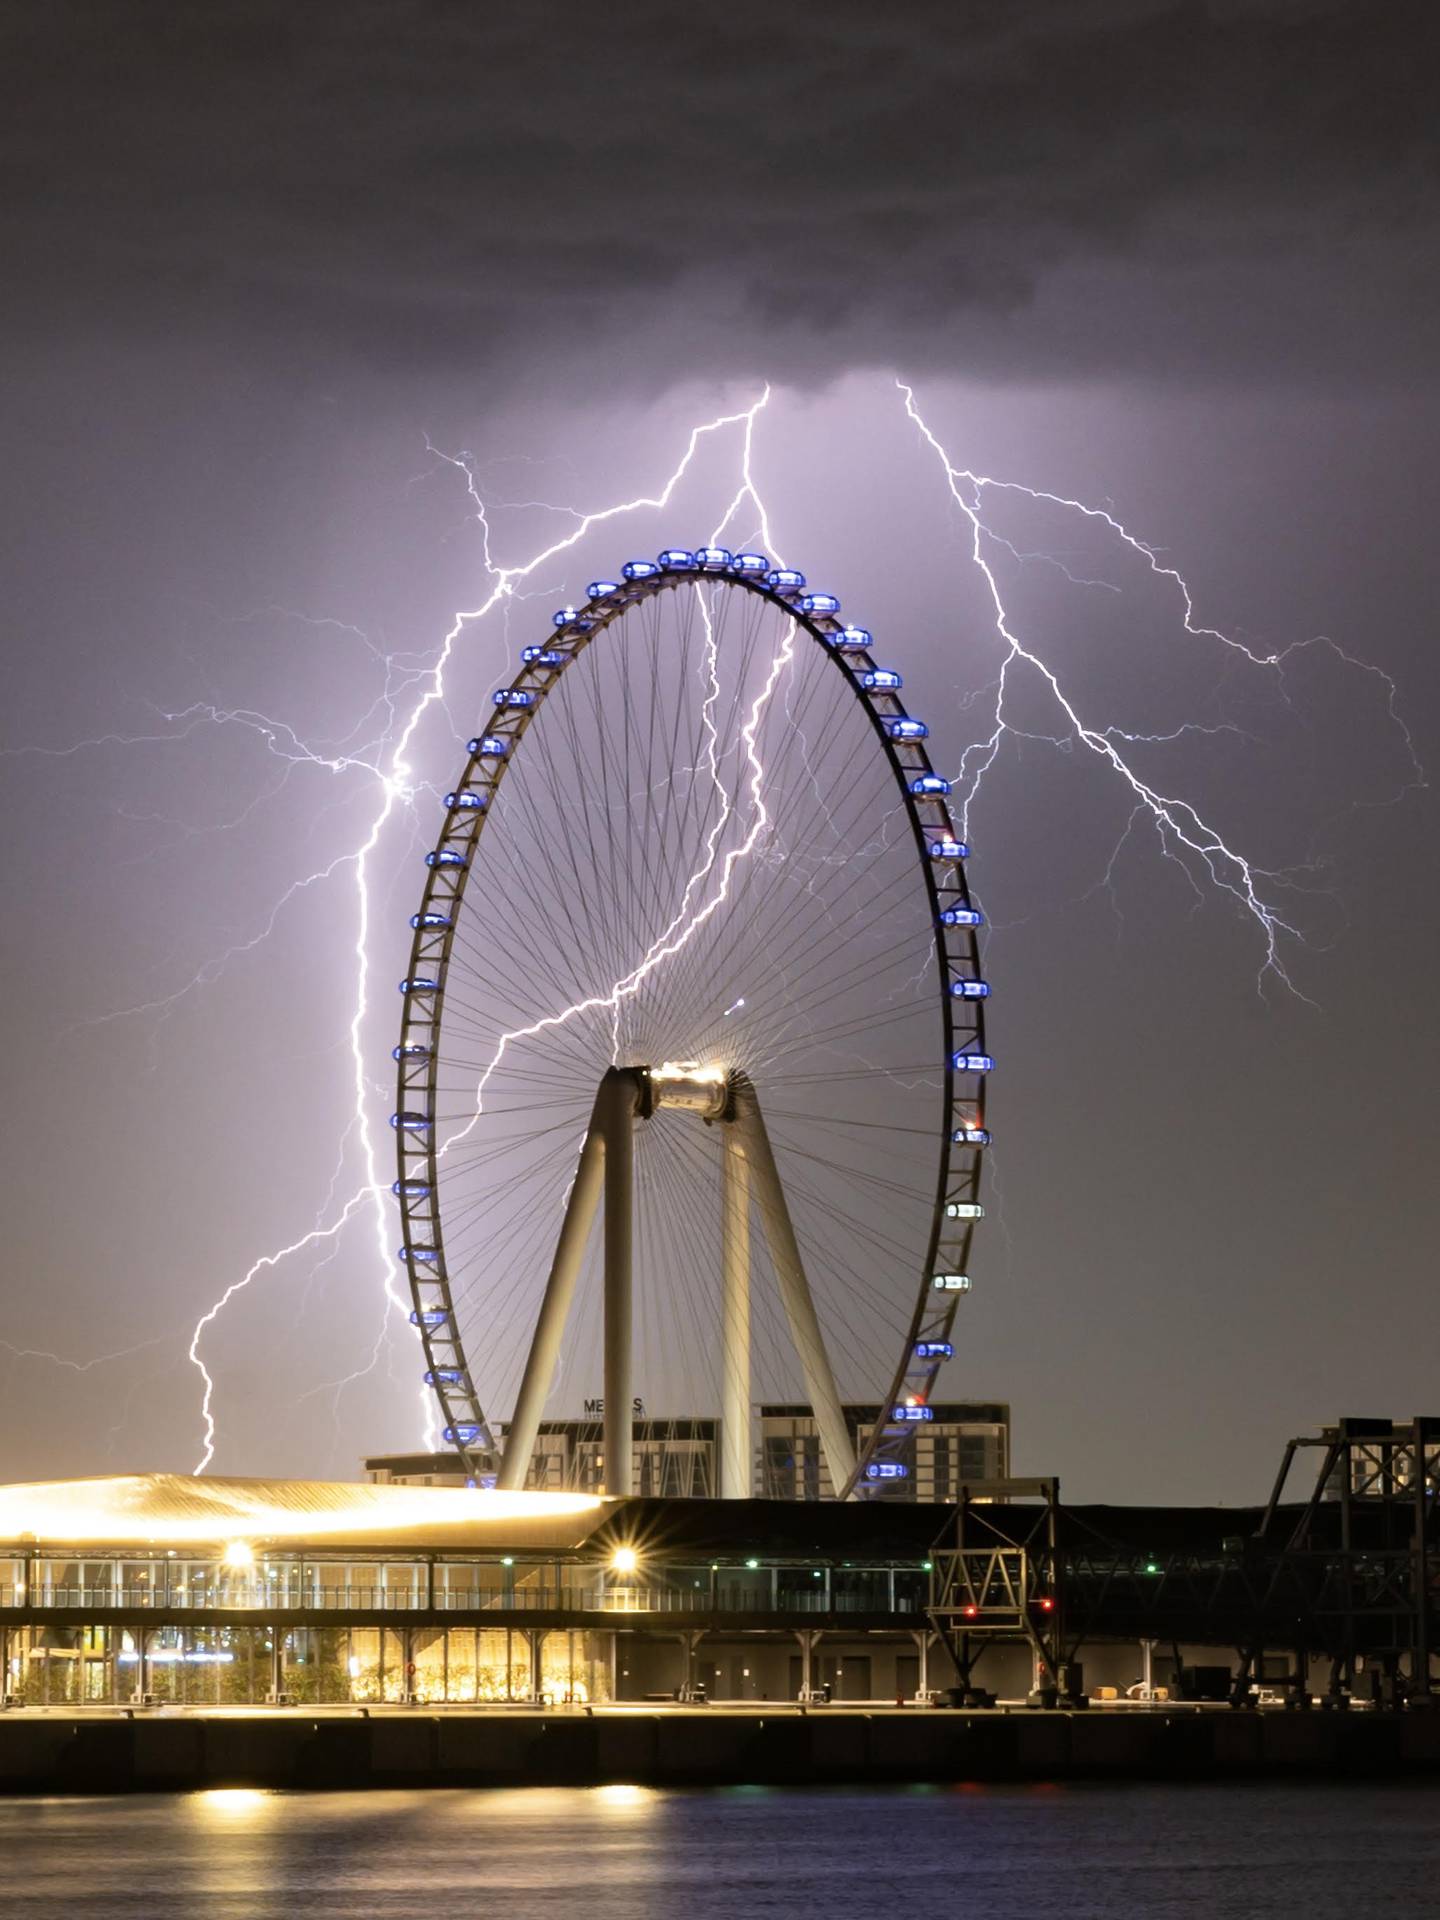 This image of lightning hitting the Ain Dubai was taken by photographer Zohaib Anjum at 2am on Wednesday morning. The image was shared on his Instagram page @vertigodubai. Photo: Zohaib Anjum